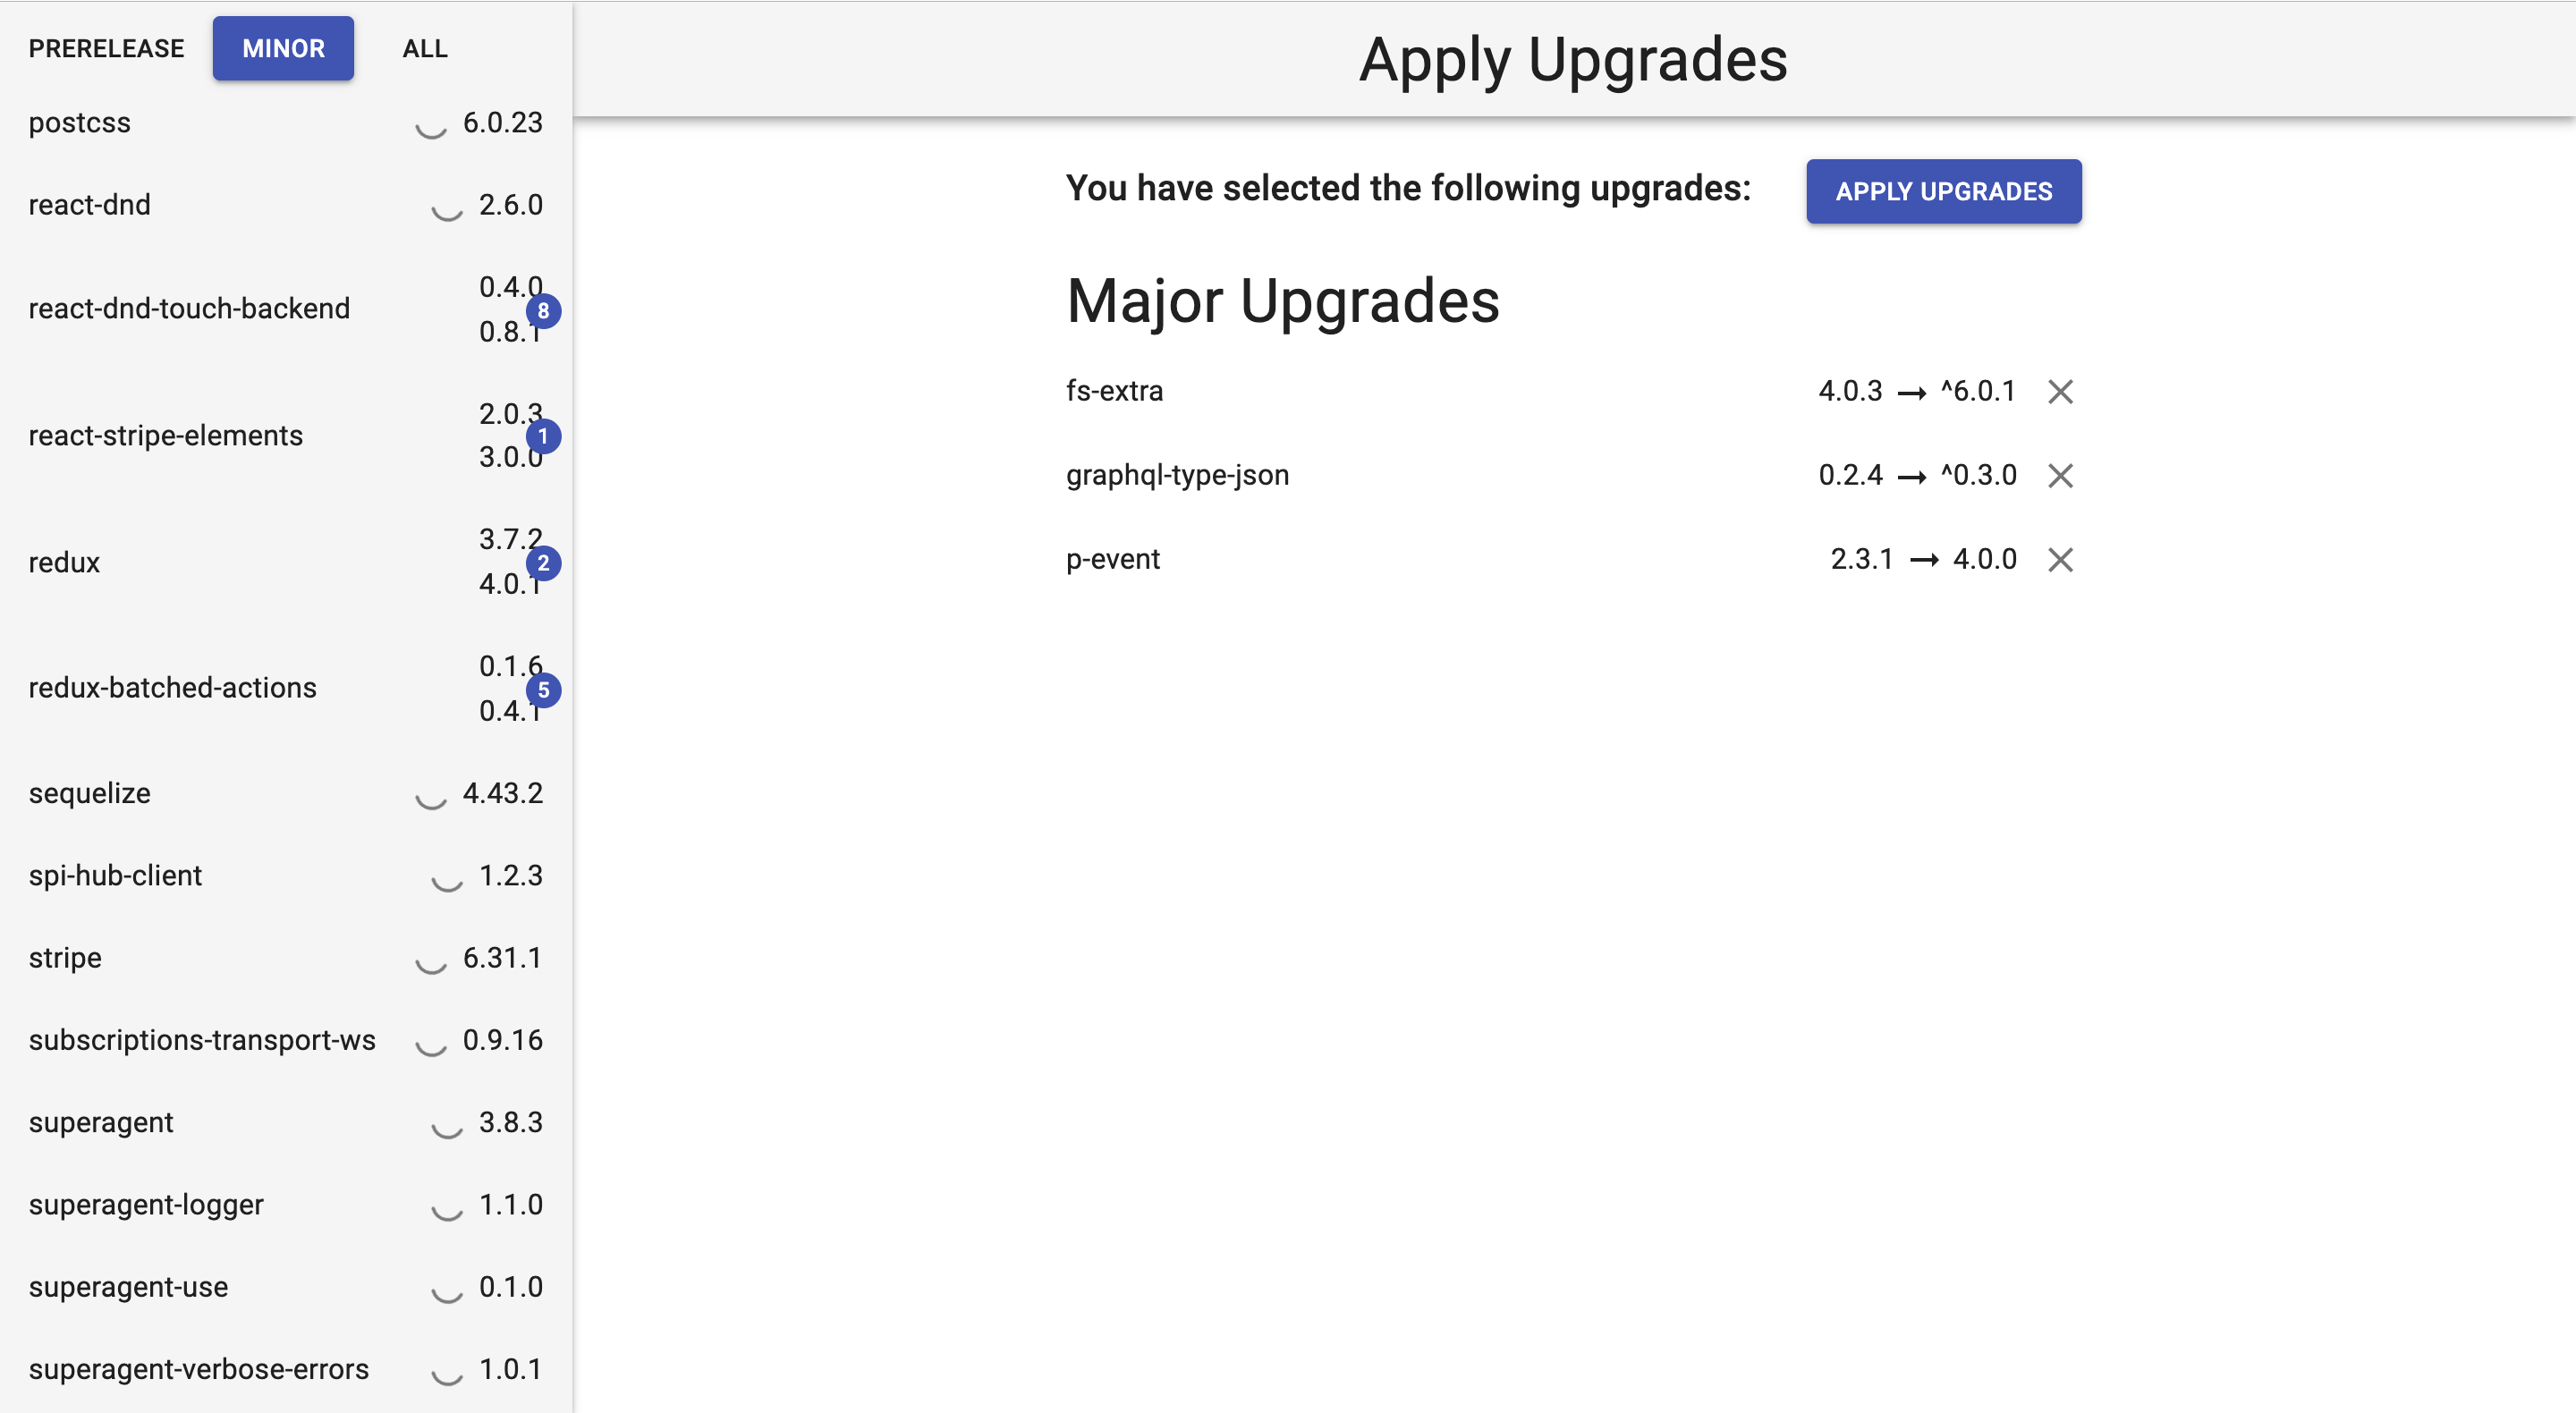 apply-upgrades-view.png